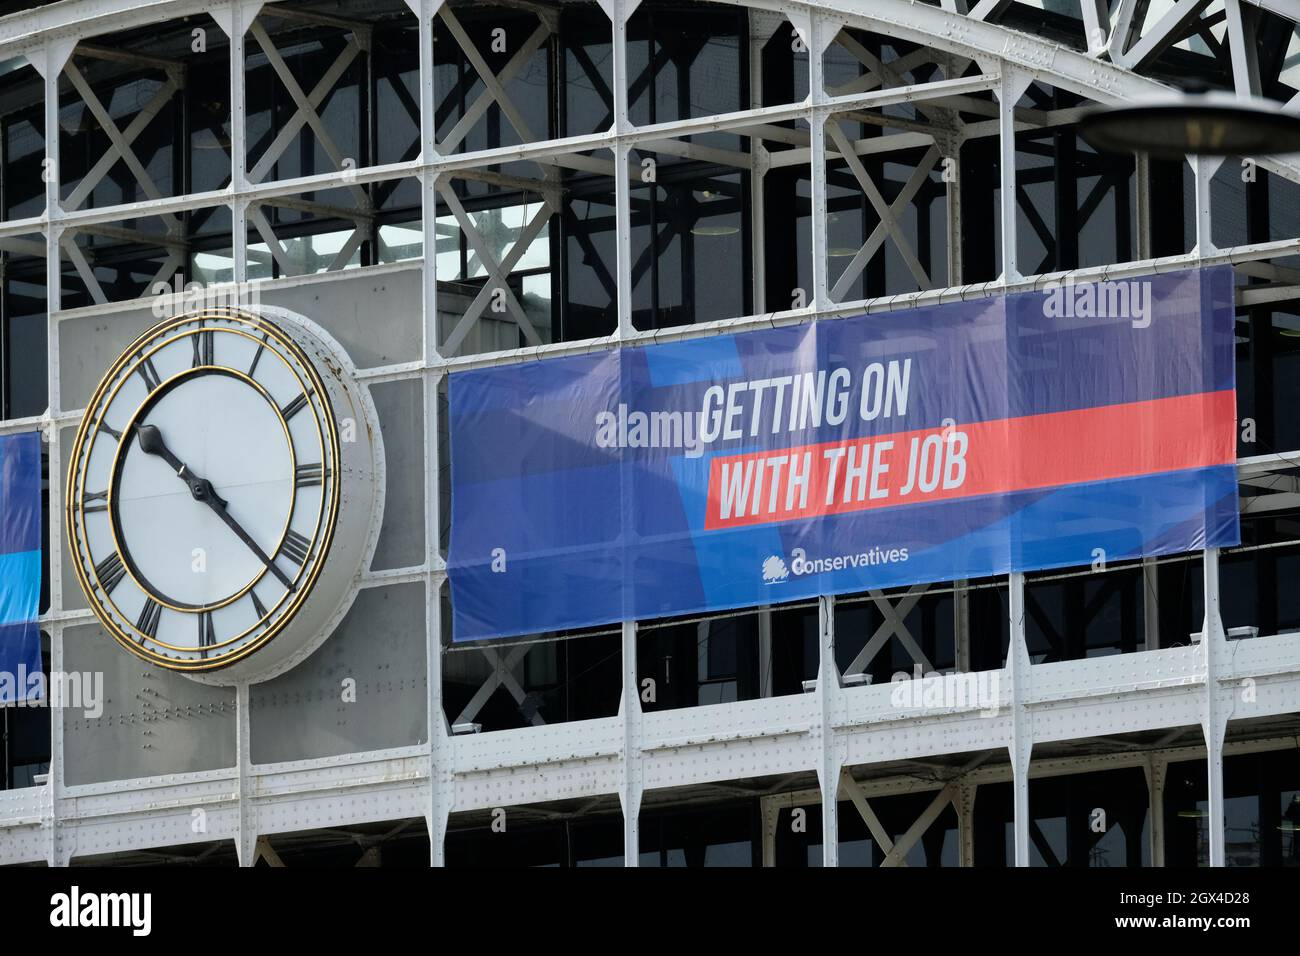 Manchester, UK – Monday 4th October 2021 – Getting on with the Job - Conservative Party Conference slogan at the Manchester Central Convention Complex. Photo Steven May / Alamy Live News Stock Photo